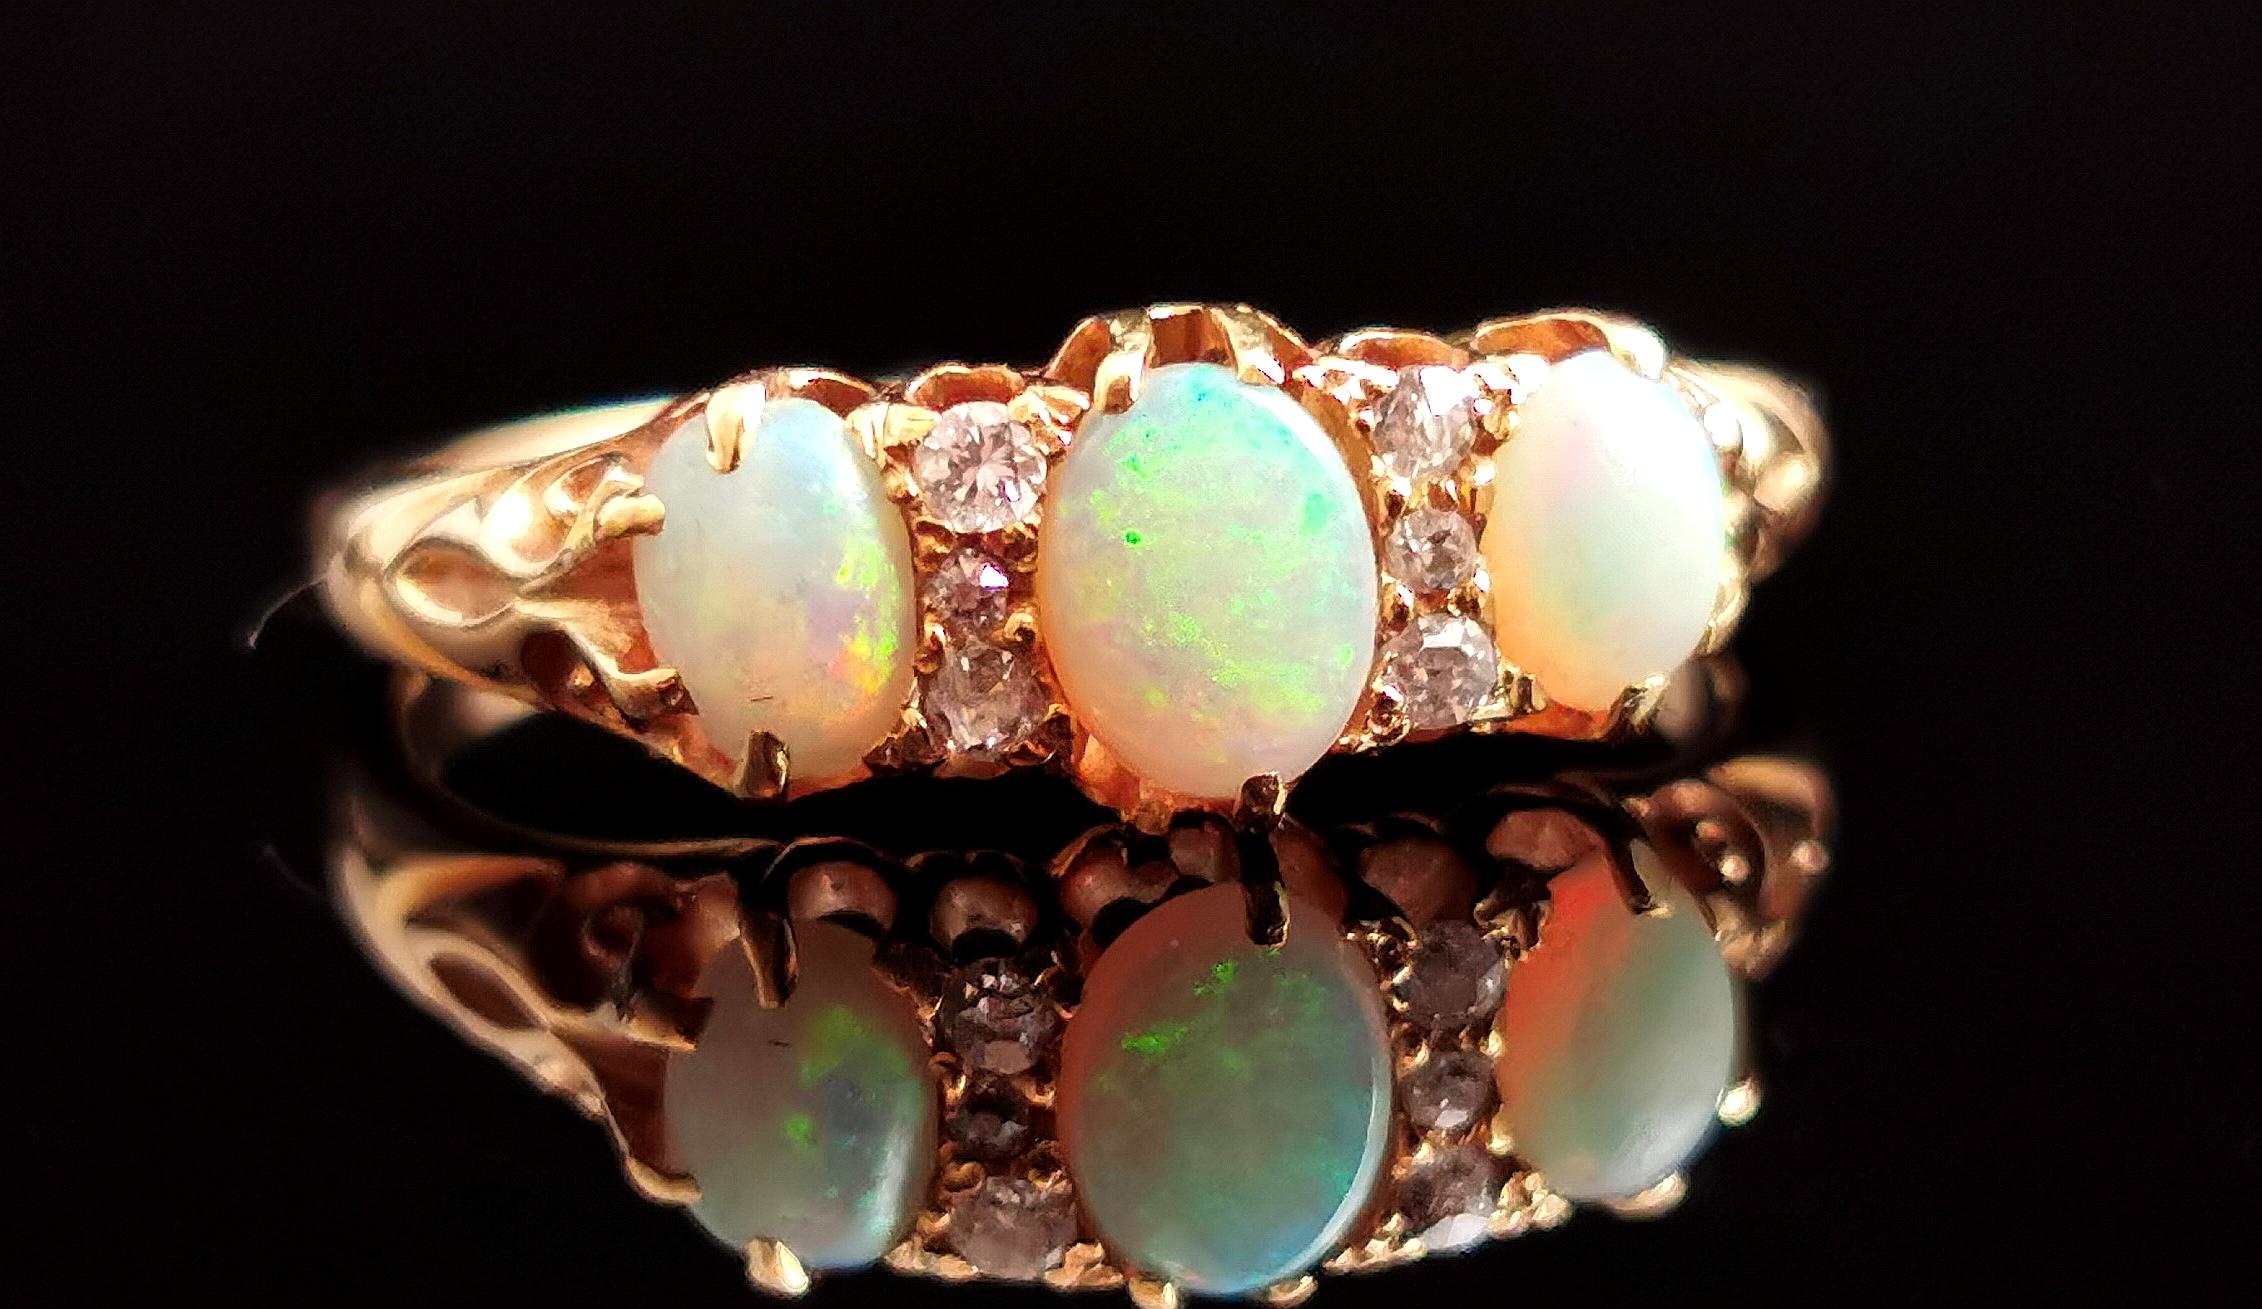 An gorgeous antique, Edwardian era opal and Rose cut diamond ring.

A rich 18kt yellow gold band with a boat head style setting and decorative engraved shoulders.

The face is set with three beautiful opal cabochons, the largest to the centre with a